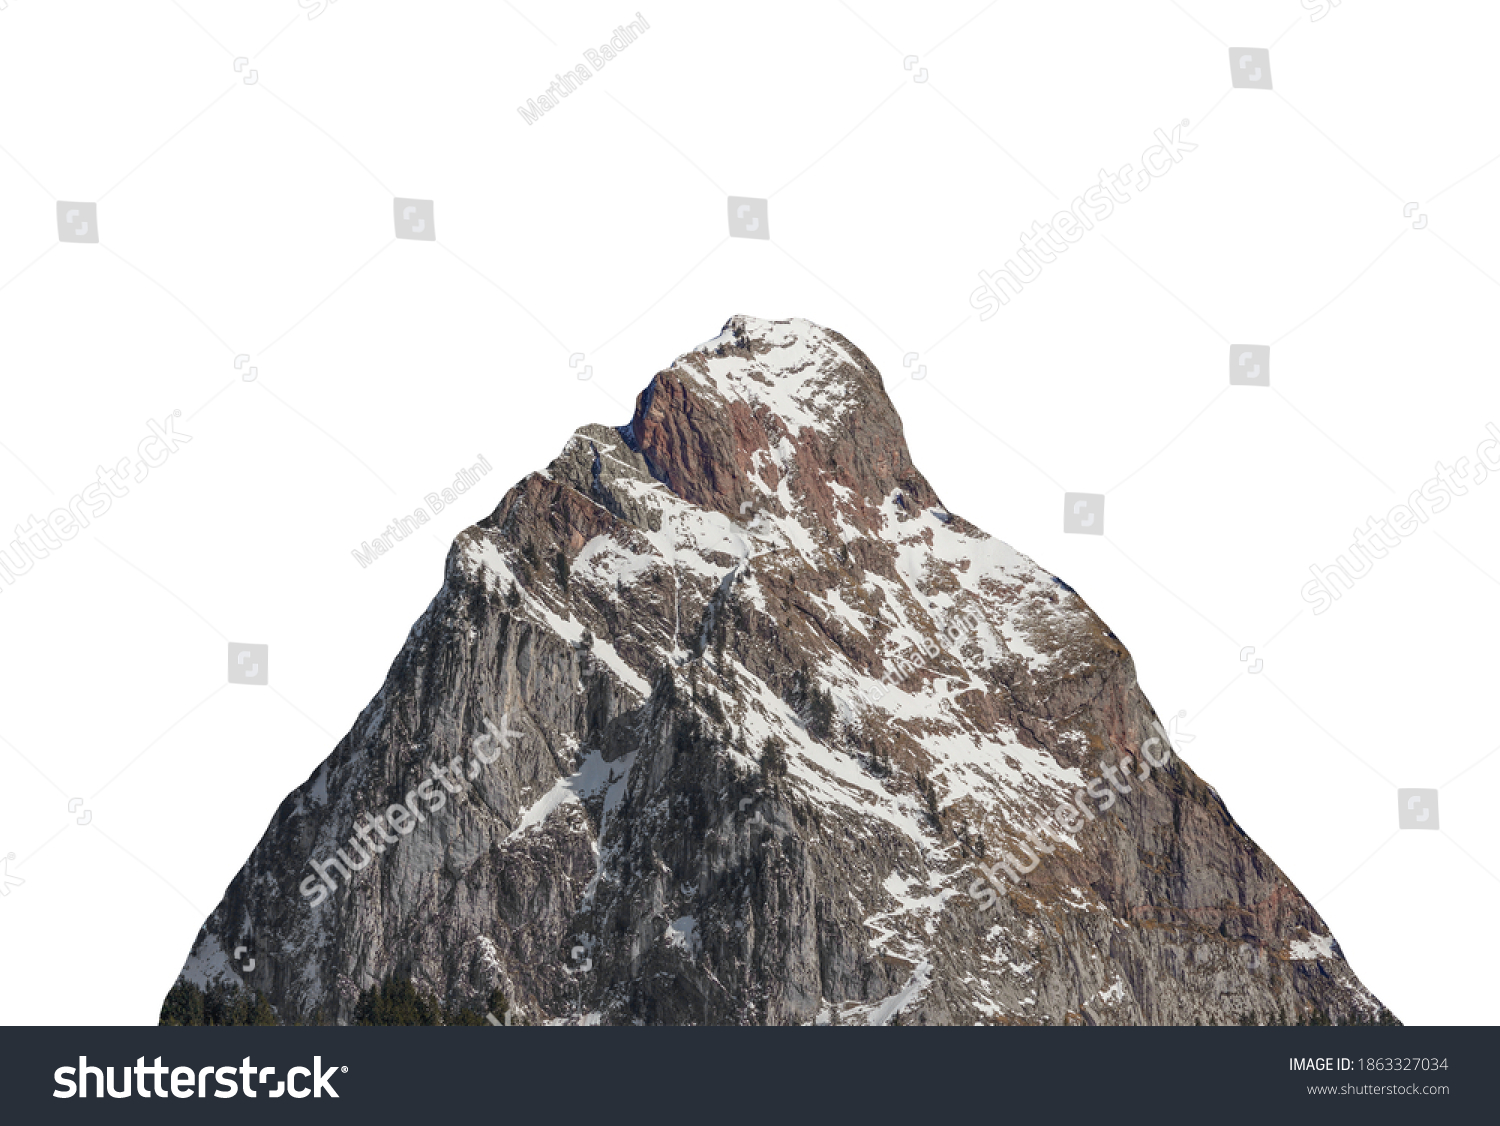 Summit of a mountain isolated on white background #1863327034